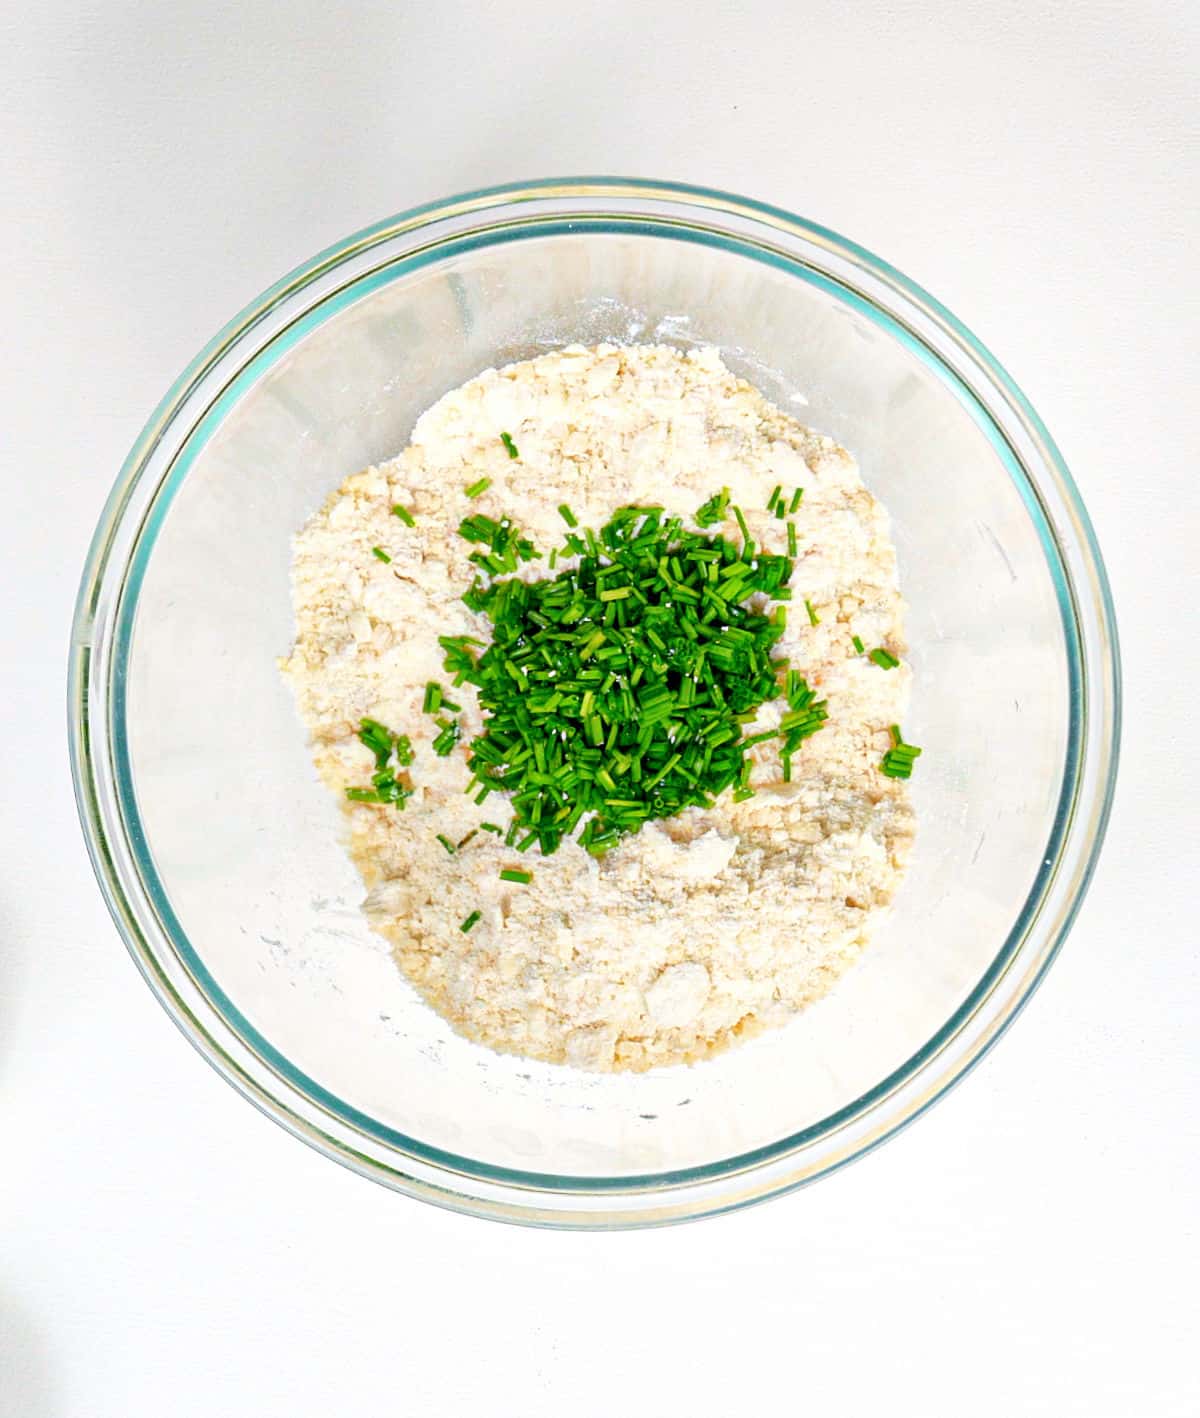 Glass bowl with scone ingredients and chopped chives. White surface.